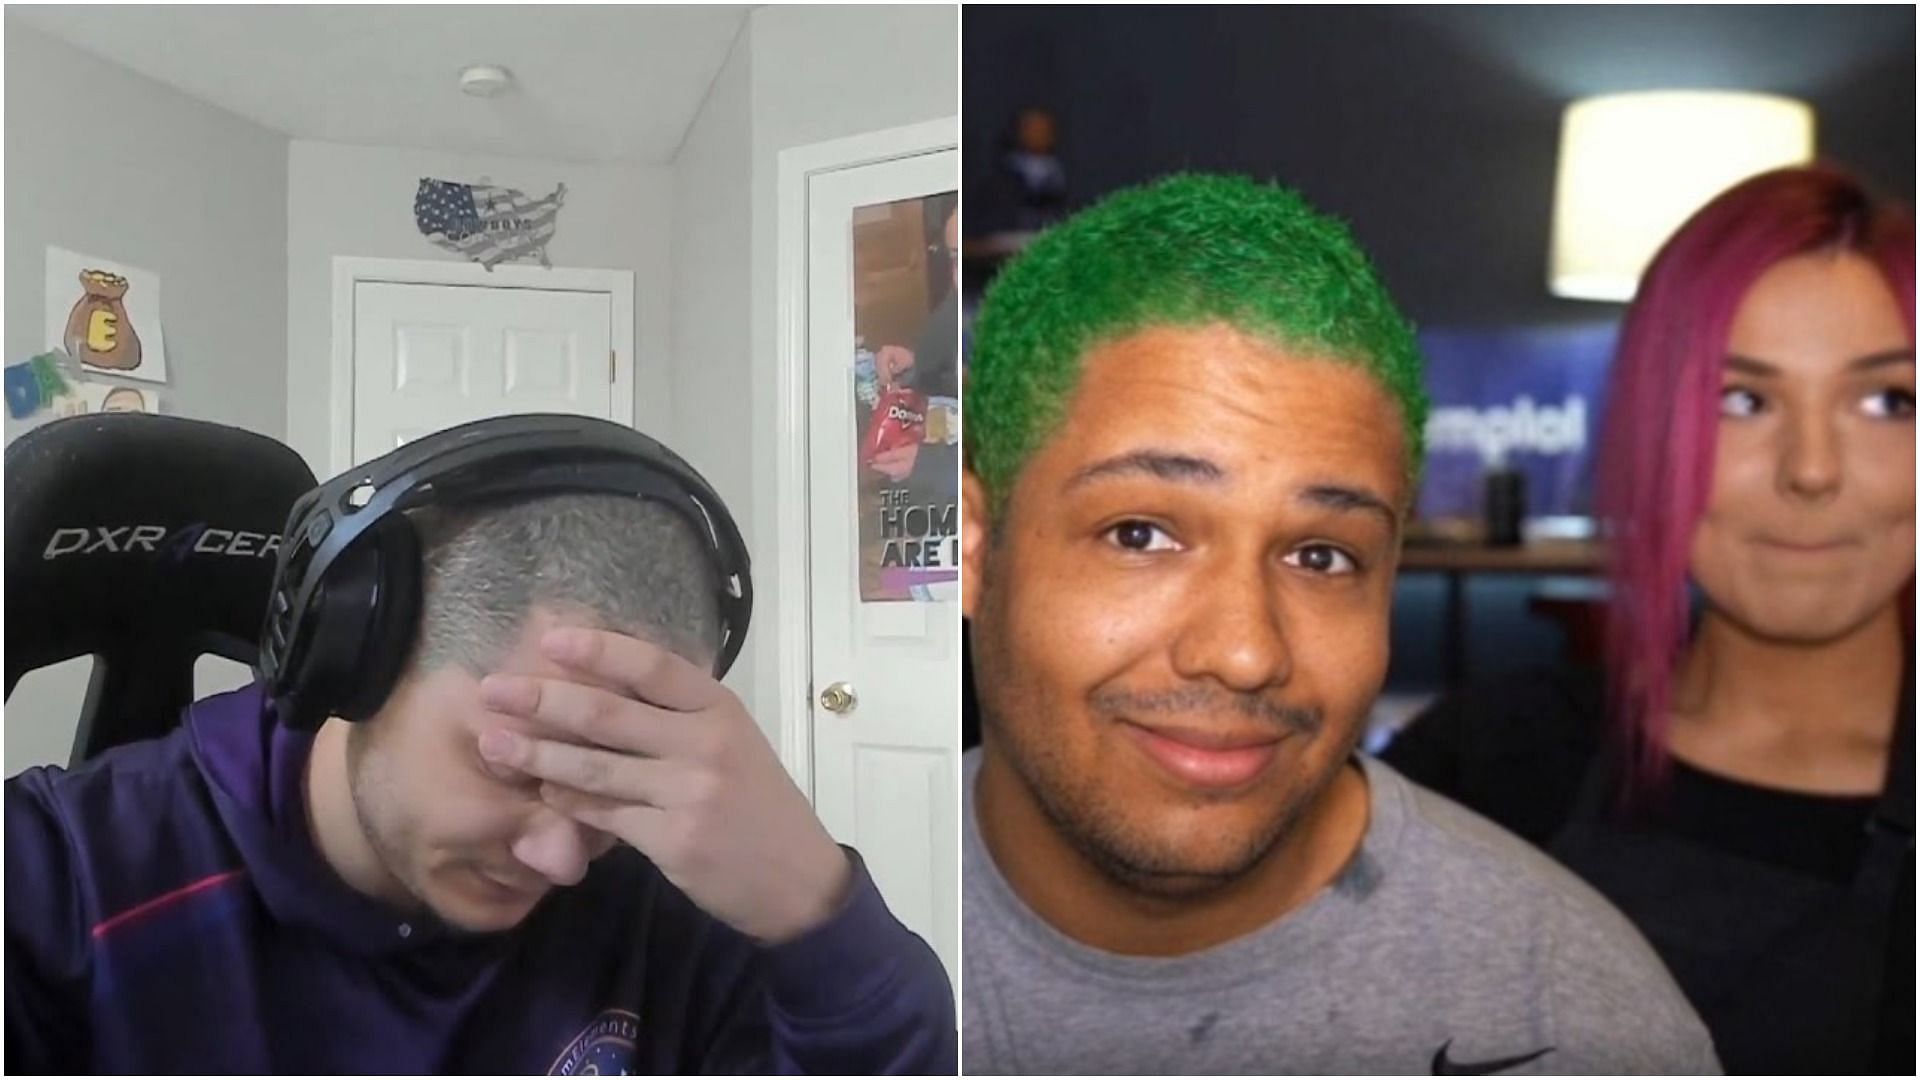 Nmplol and others react to Erobb eating cardboard (Image via YouTube and Soundcloud)